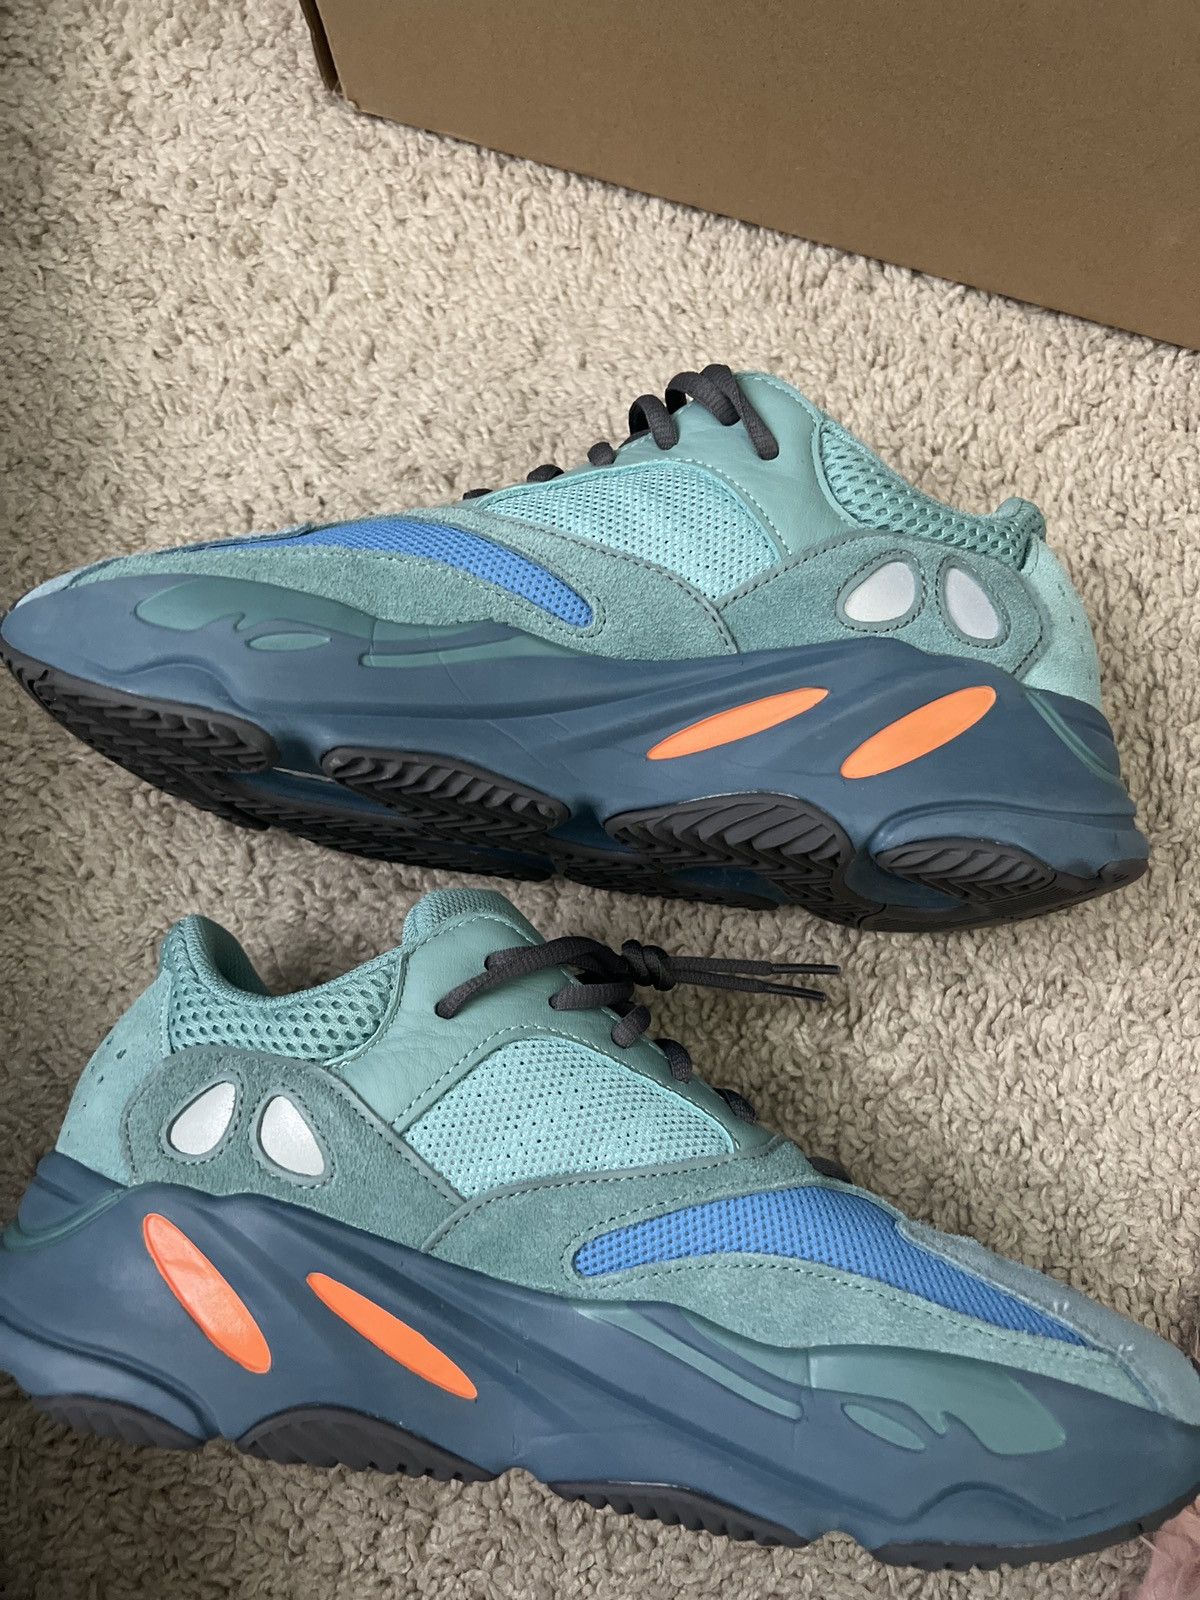 Where To Buy Supreme Vans, Yeezy 700 Fade Azure & More